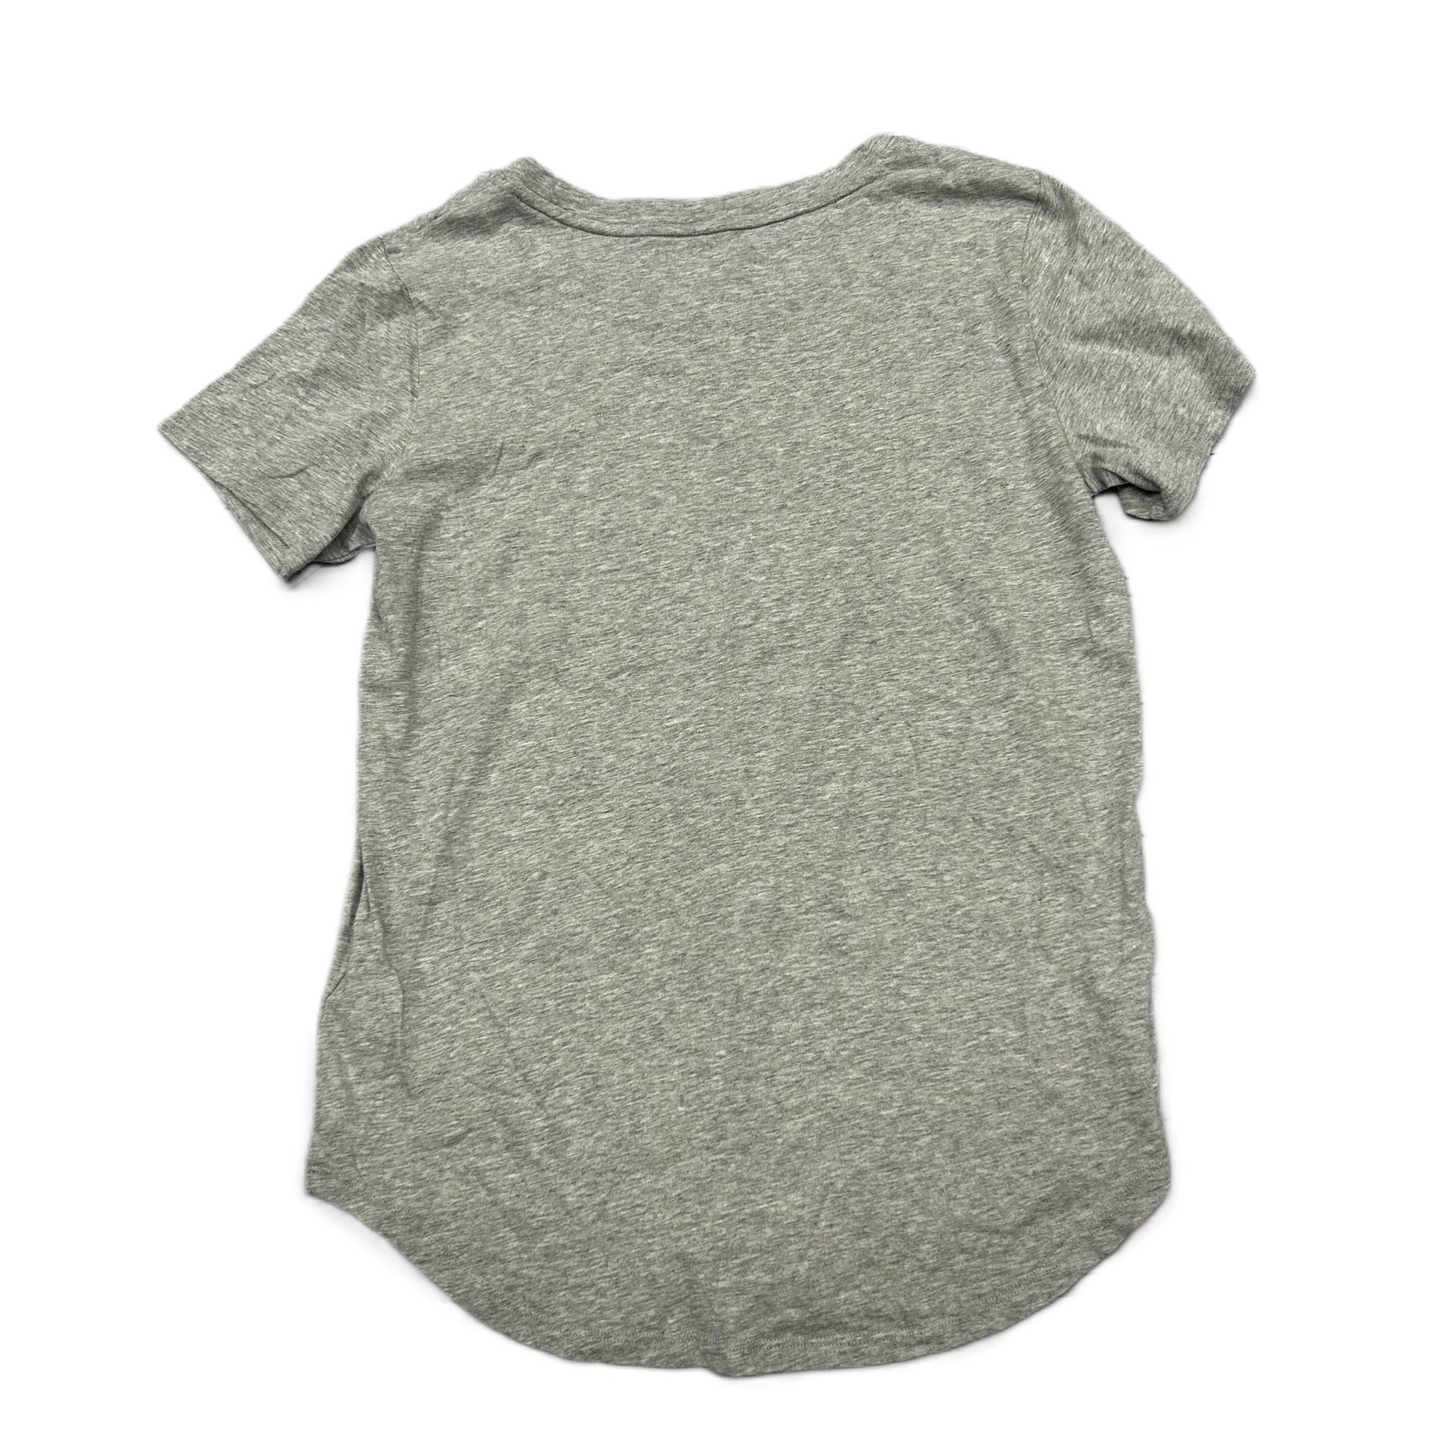 Top Short Sleeve By Gap  Size: Xs